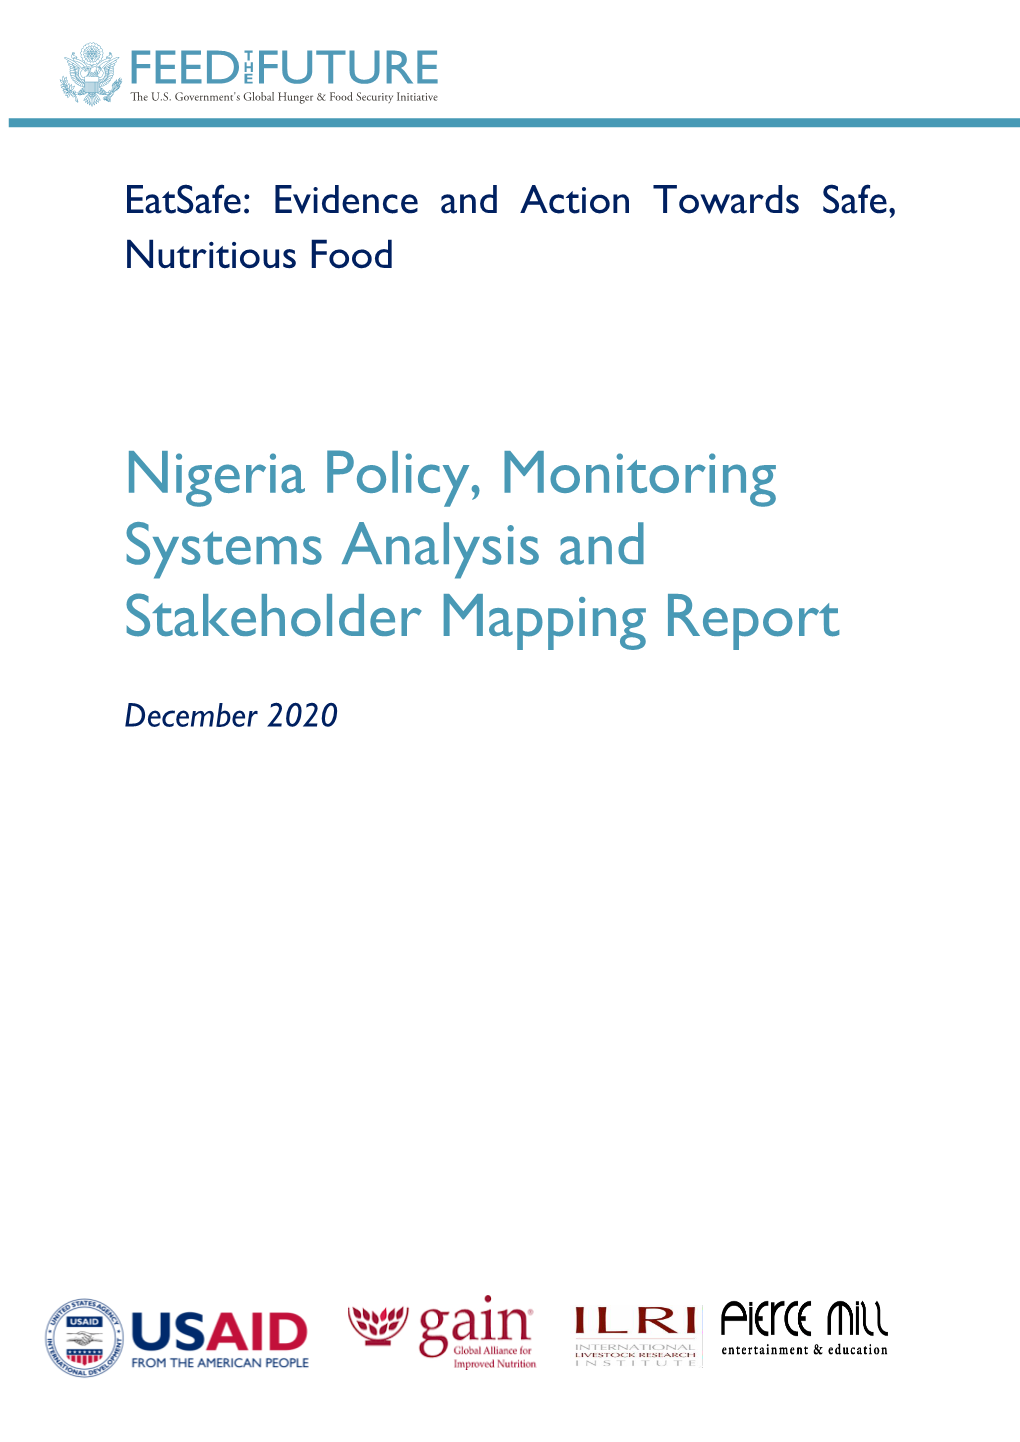 Nigeria Policy, Monitoring Systems Analysis and Stakeholder Mapping Report